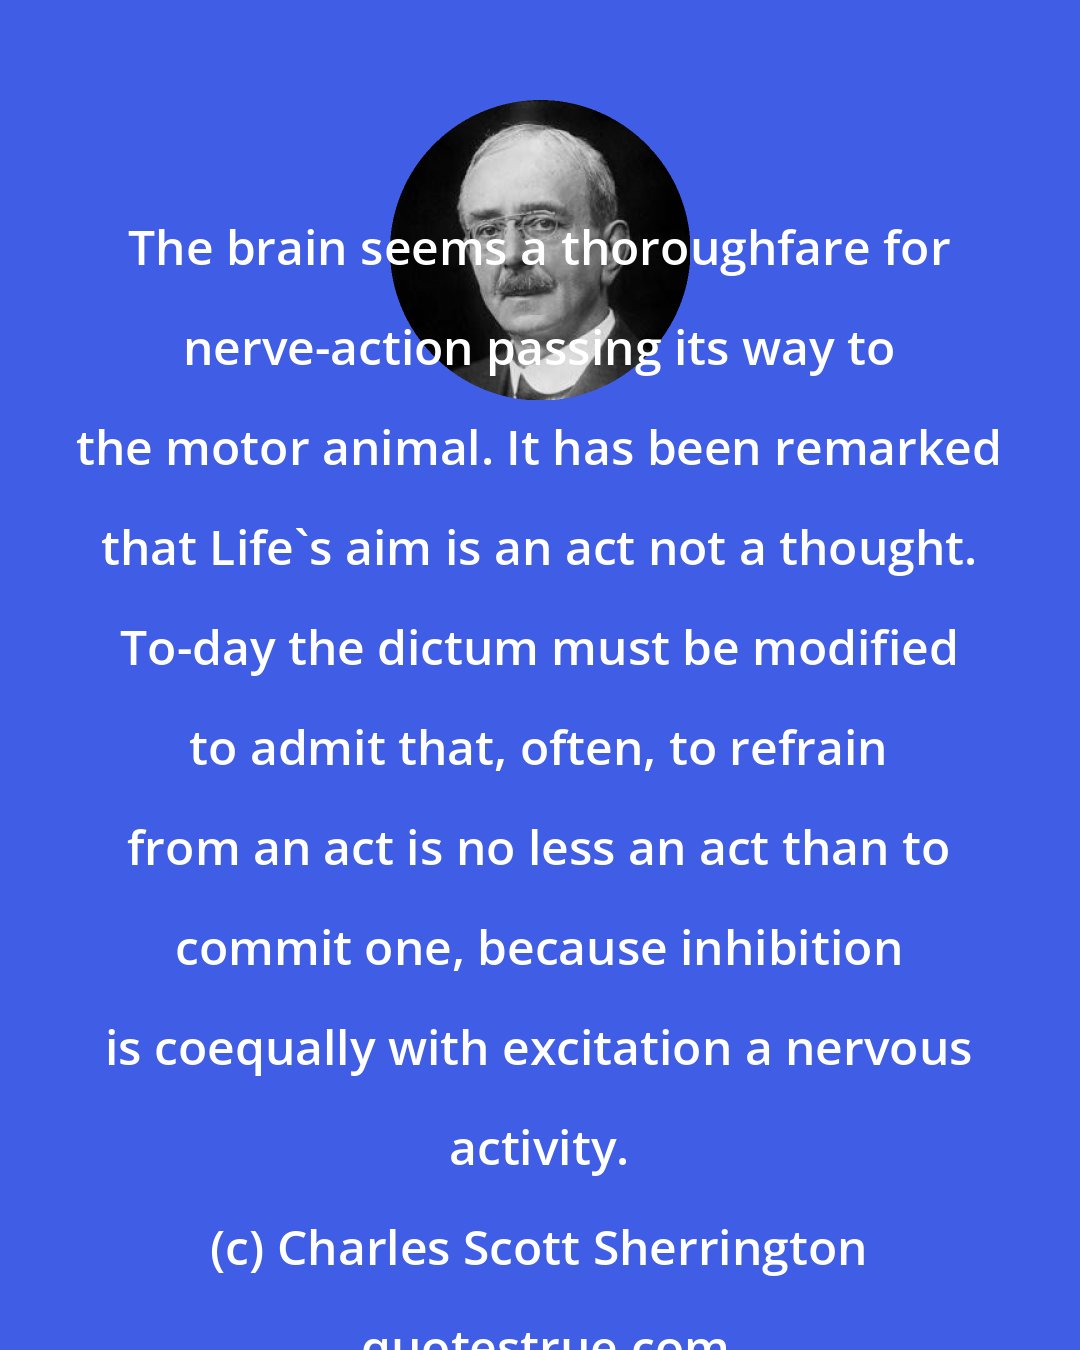 Charles Scott Sherrington: The brain seems a thoroughfare for nerve-action passing its way to the motor animal. It has been remarked that Life's aim is an act not a thought. To-day the dictum must be modified to admit that, often, to refrain from an act is no less an act than to commit one, because inhibition is coequally with excitation a nervous activity.